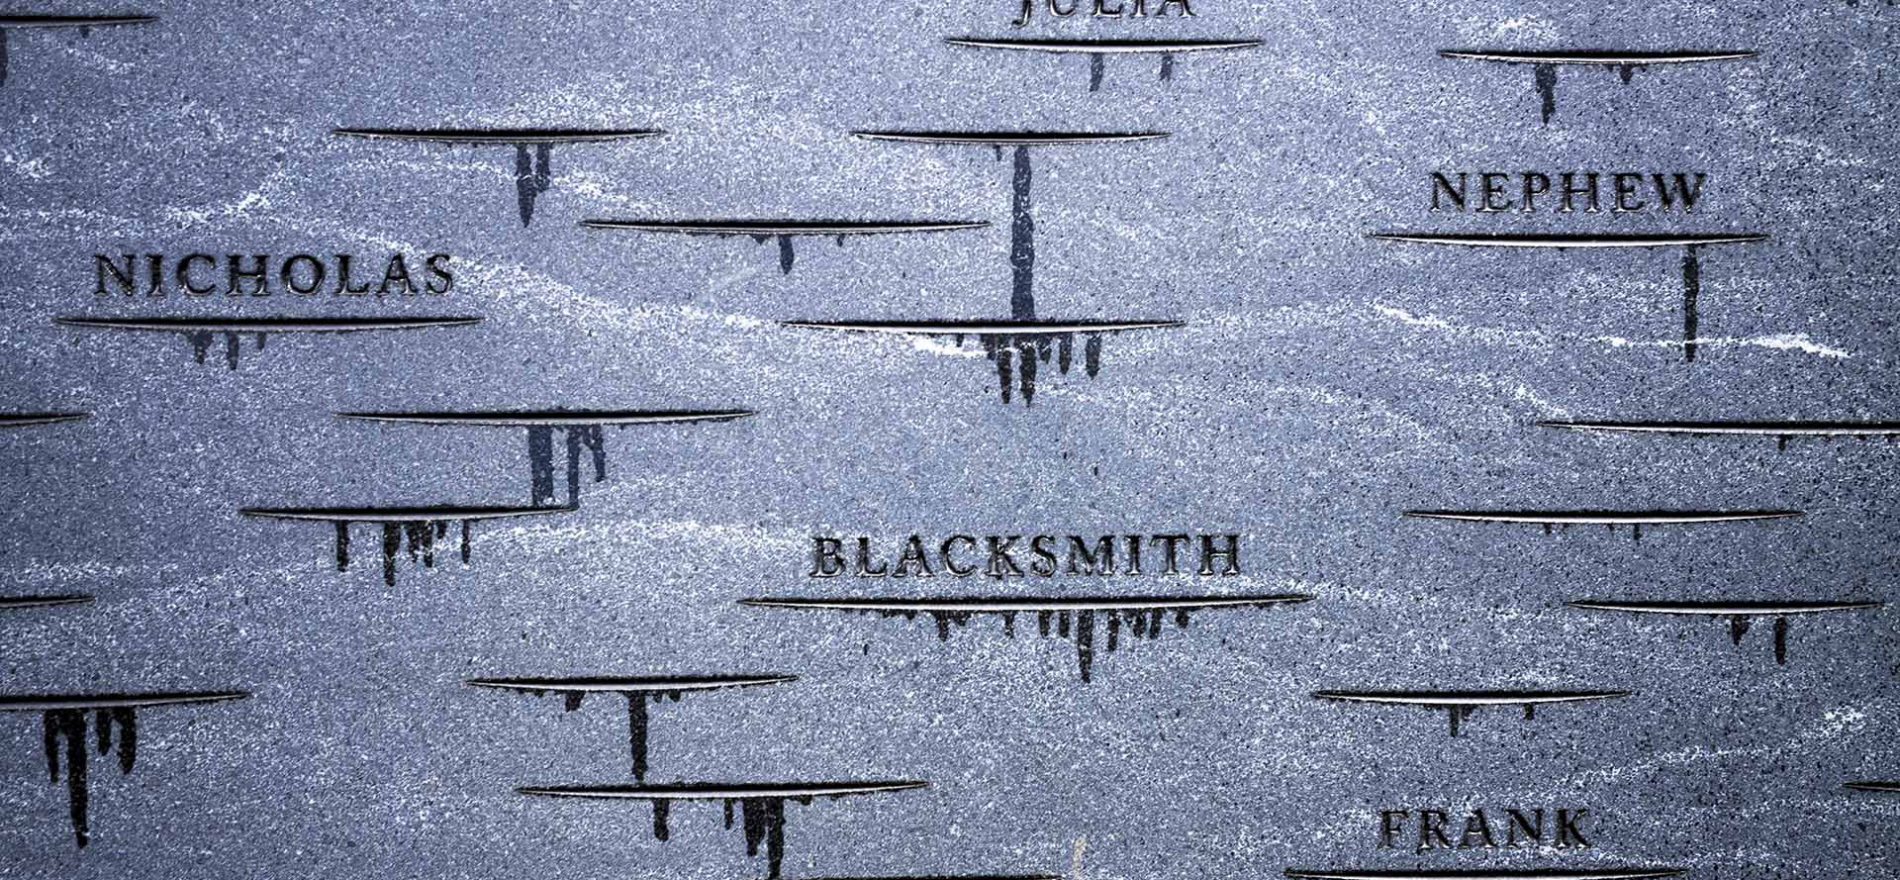 Reckoning with the Past - Names etched into the UVA Memorial